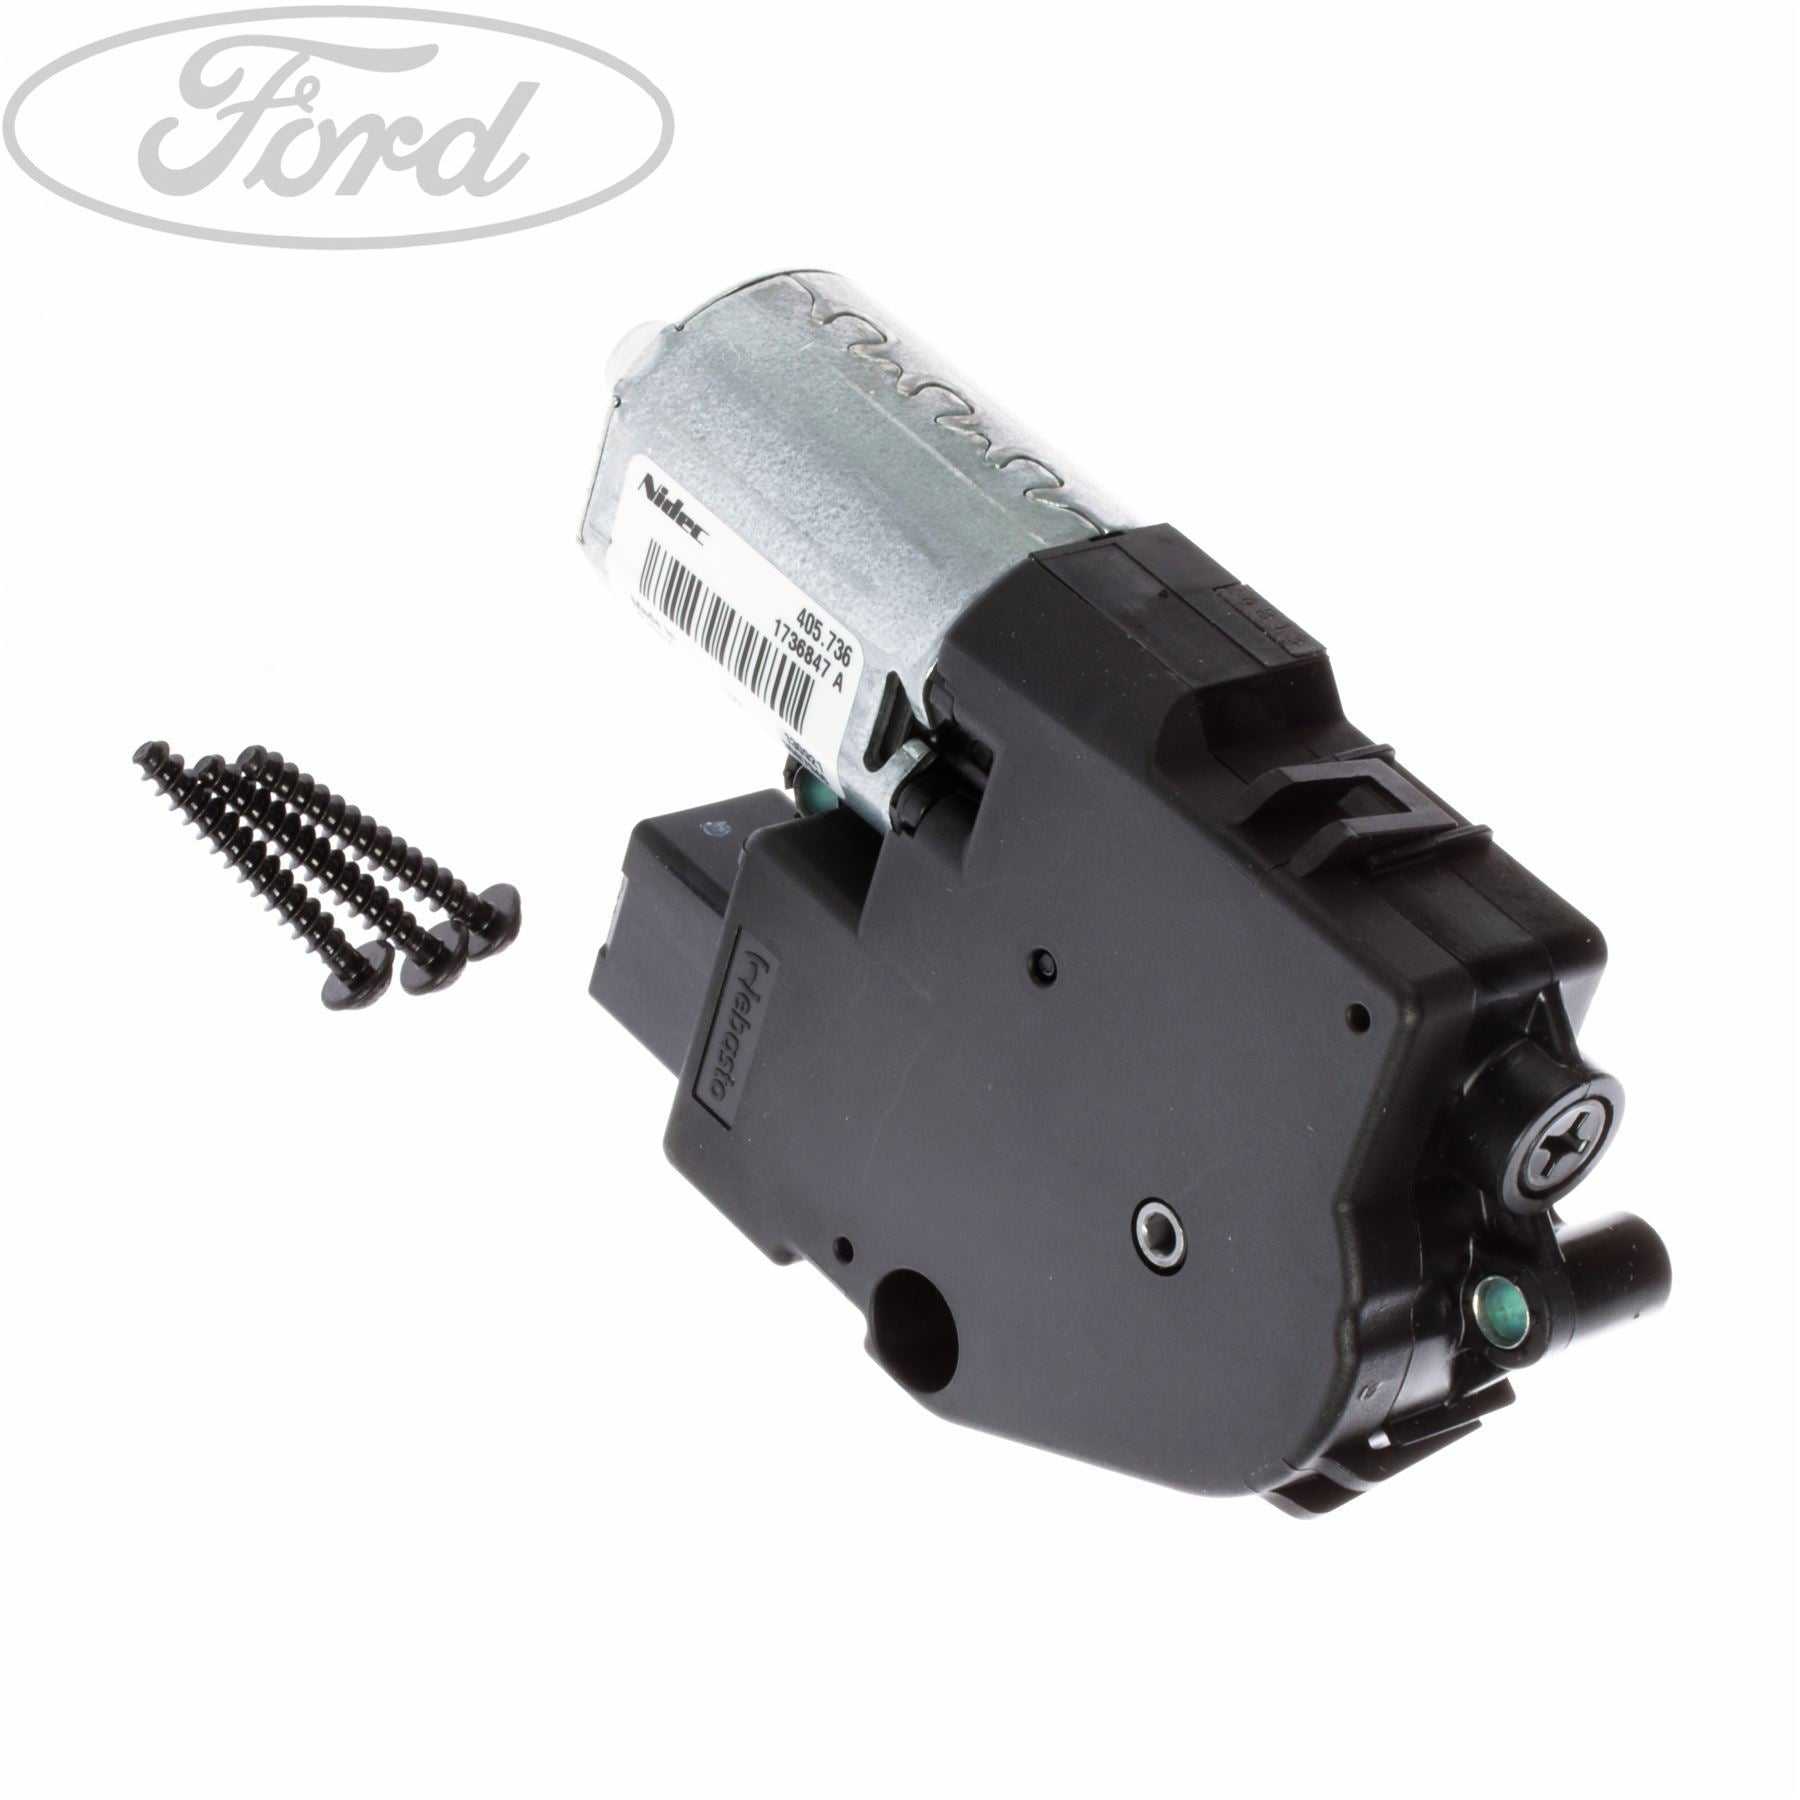 Ford, SLIDING ROOF CONTROL MOTOR